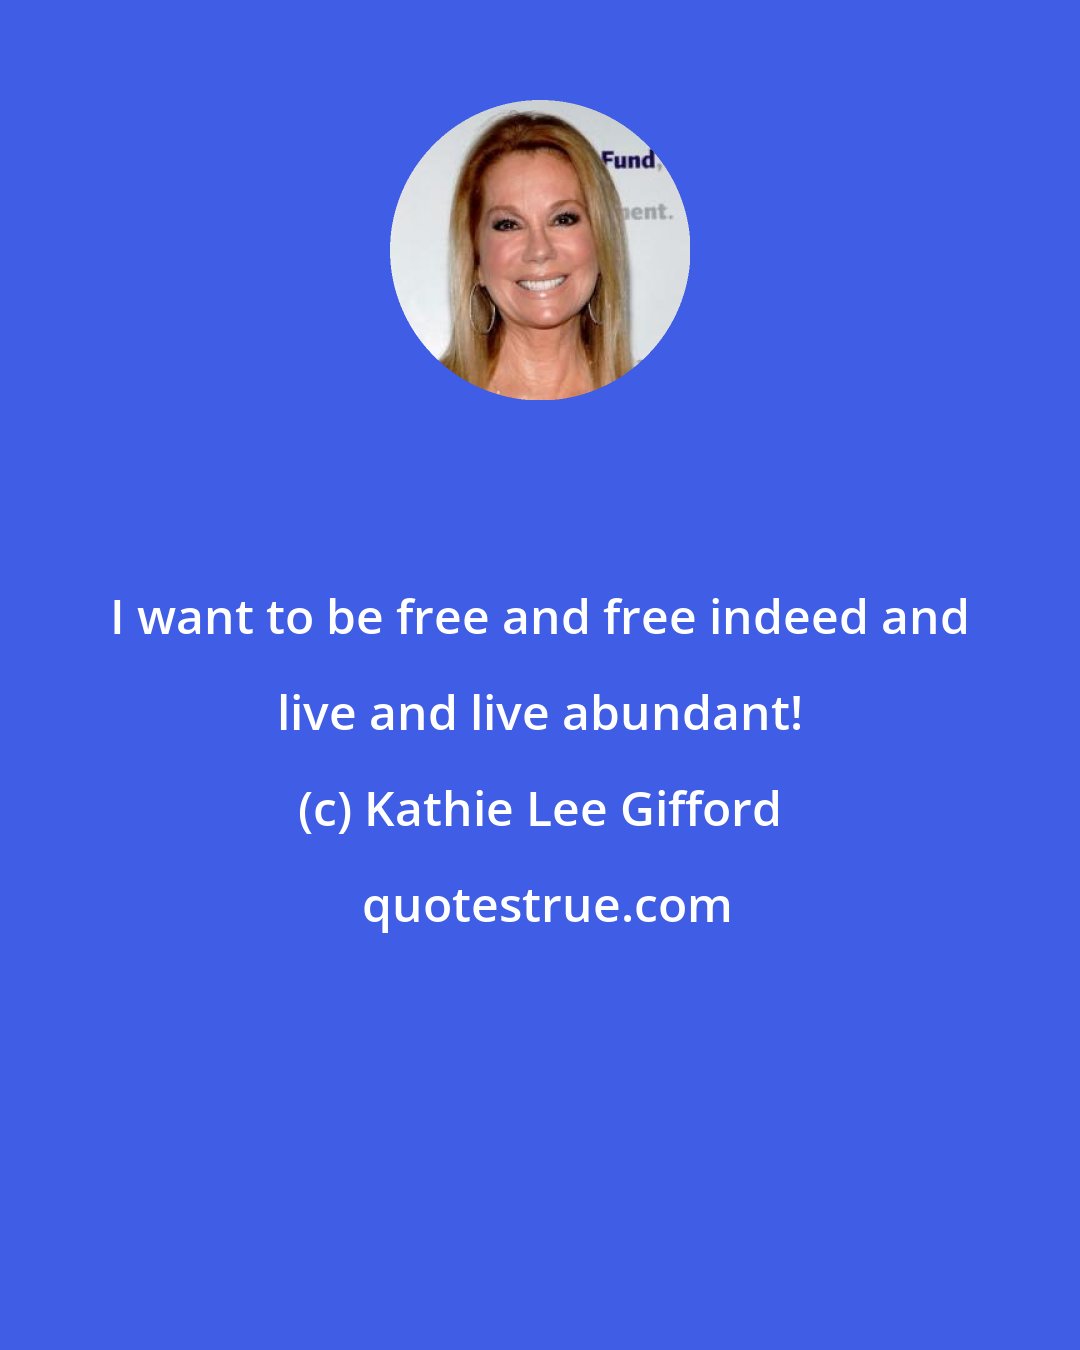 Kathie Lee Gifford: I want to be free and free indeed and live and live abundant!